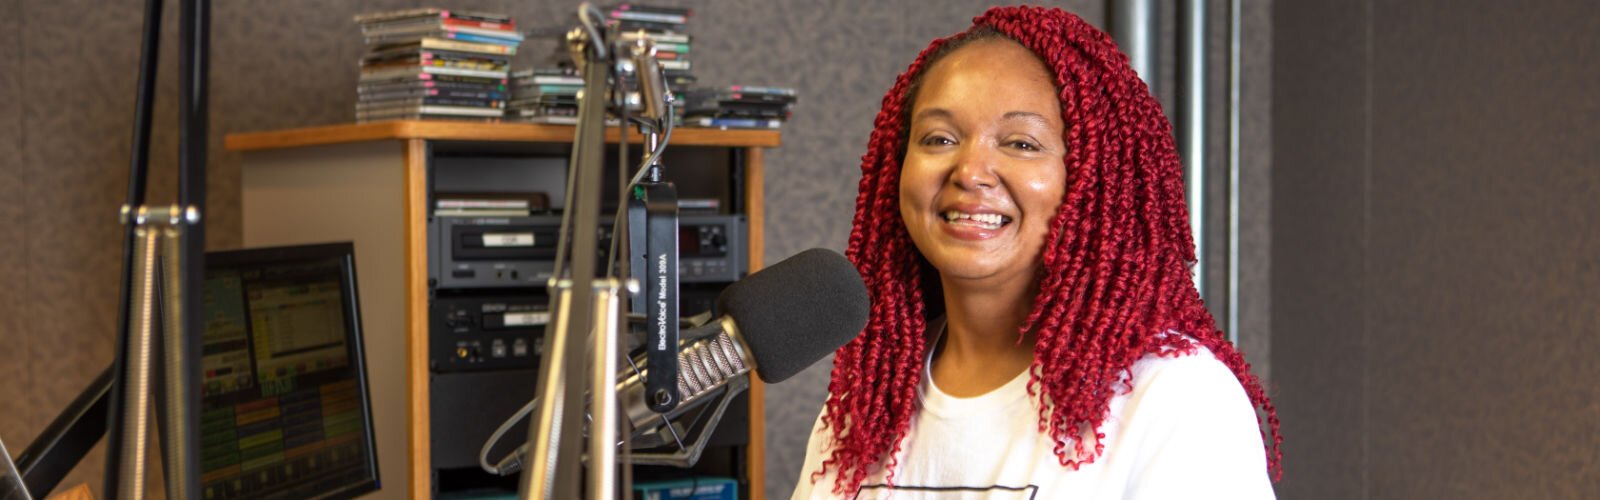 Mary Evans hosts a weekly radio show and podcast called ReEntry Stories, on NPR station 91.3 WYSO-FM, Yellow Springs, OH.